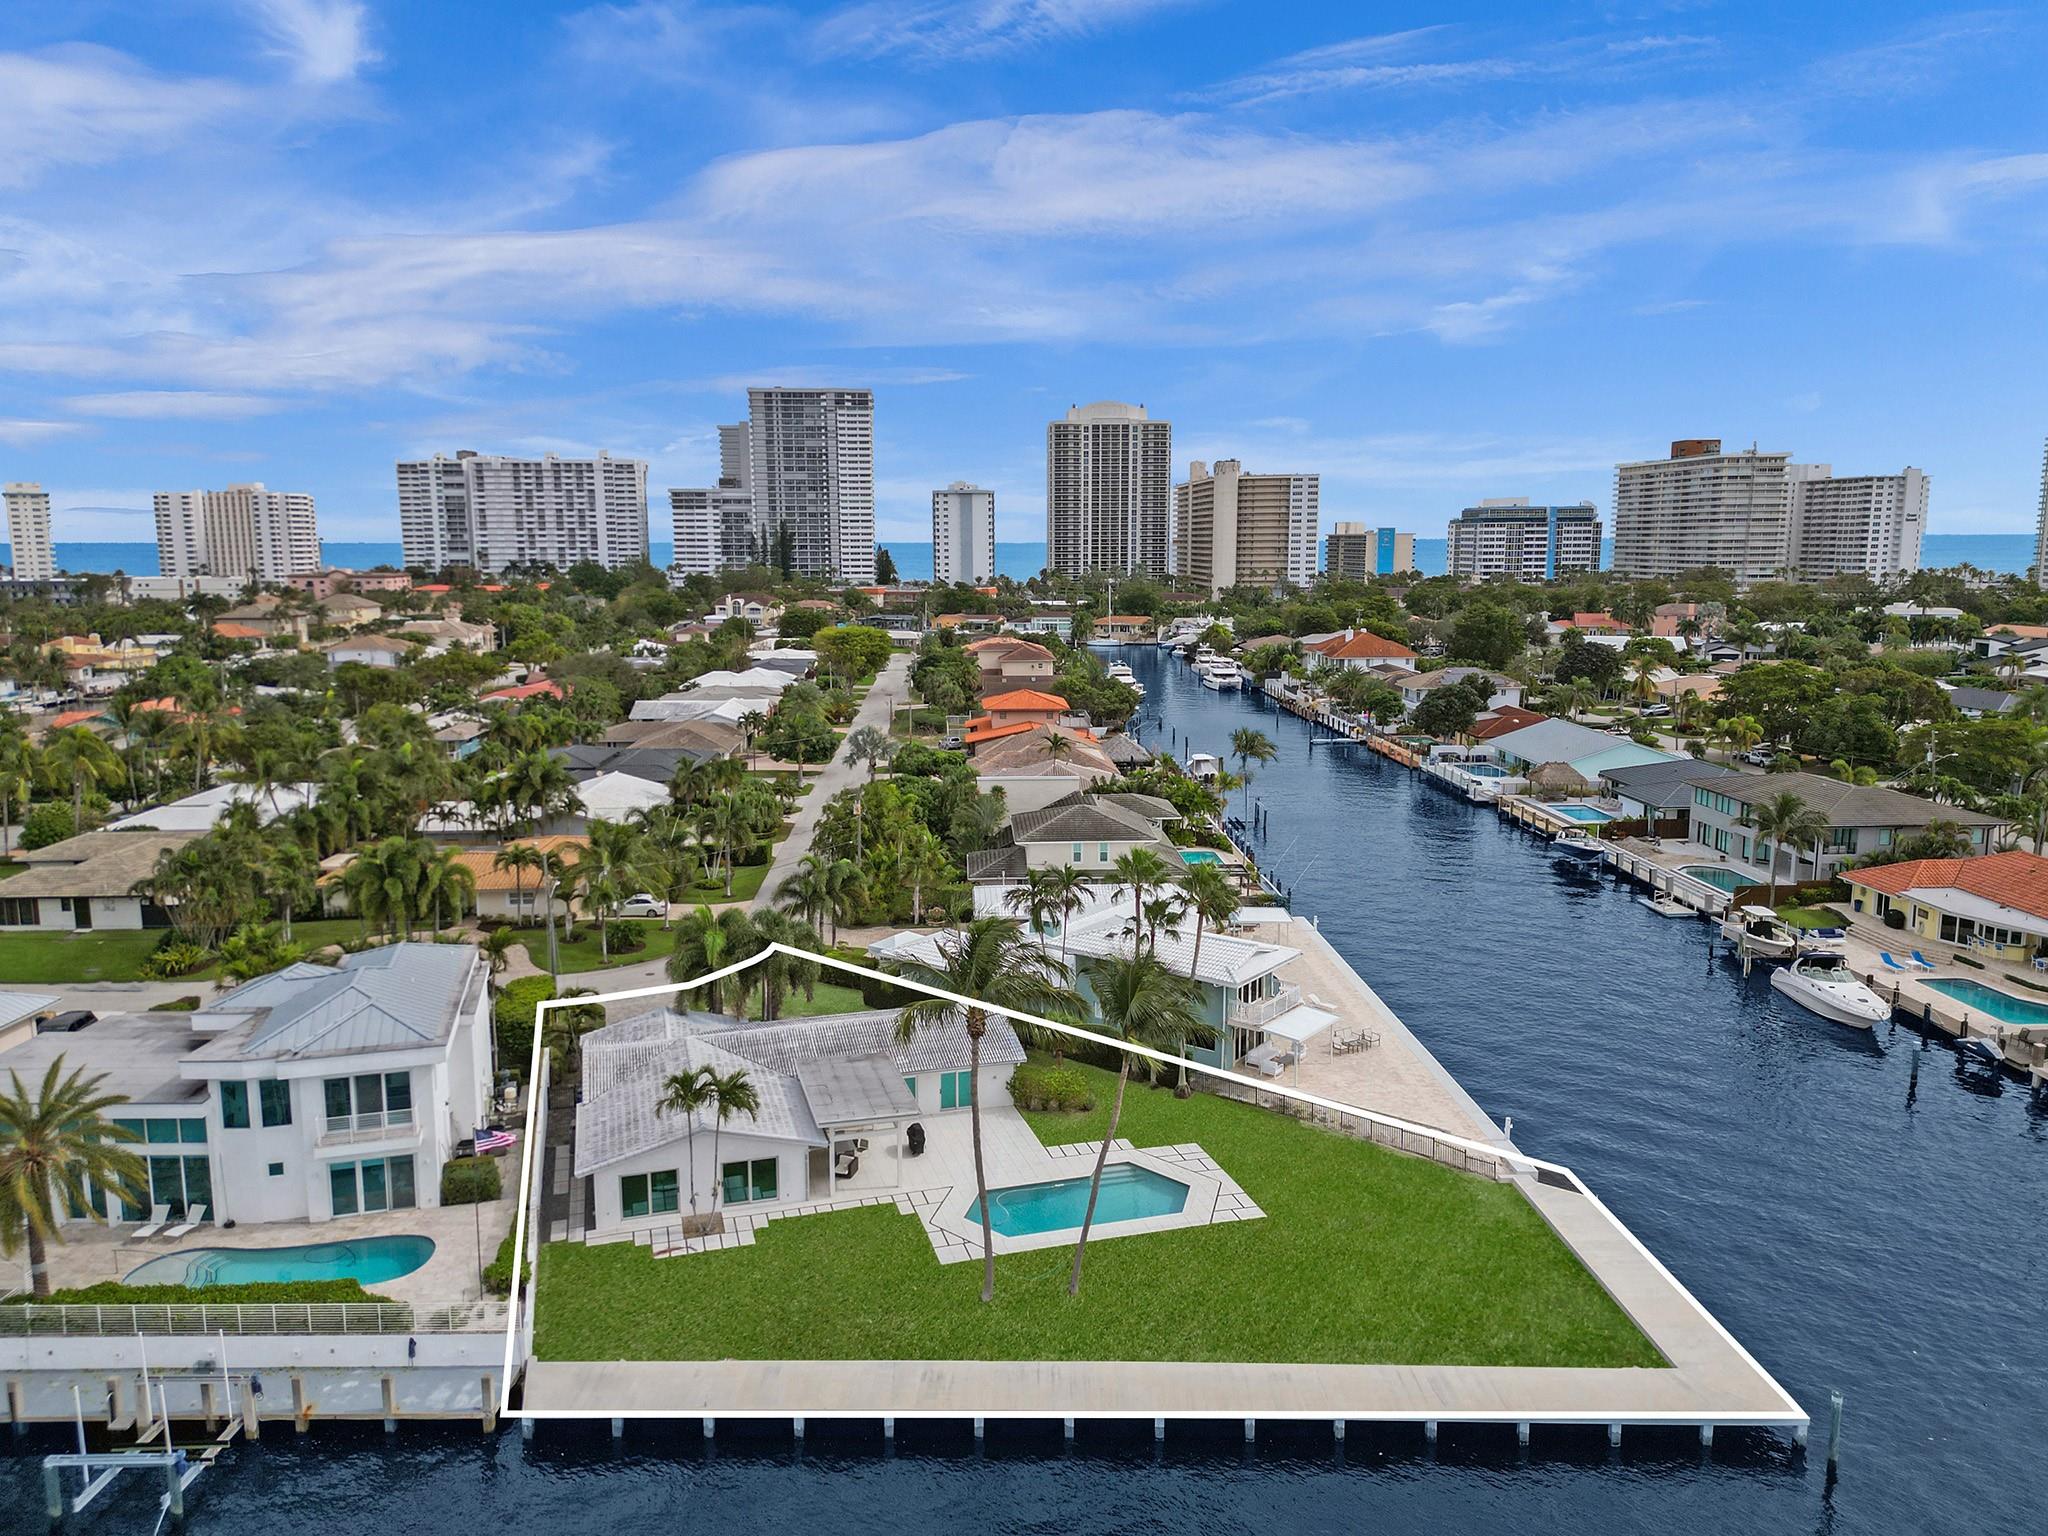 RARELY AVAILABLE POINT LOT IN HIGHLY DESIRABLE BERMUDA RIVIERA! One-of-a-kind home featuring approx. 140' on the Intracoastal & 51.9' on the canal! Build your dream home on this oversized 14,661 SF lot or add to the existing 3 bed, 2 bath newer construction modern minimalist home. Ultra contemporary walnut concealed kitchen w/ Miele & Thermador appliances! Open floor plan w/ floor-to-ceiling impact sliders allowing panoramic views to watch yachts go by & enjoy from your private backyard w/ pool! NEW concrete dock! High-end European fixtures & electric shades thru/out! Fully controllable remotely via phone or ipad! Short walk to Fort Lauderdale Beach, restaurants & shopping! One entrance guardhouse! Home being sold completely turn-key. Must see all this desirable property has to offer!